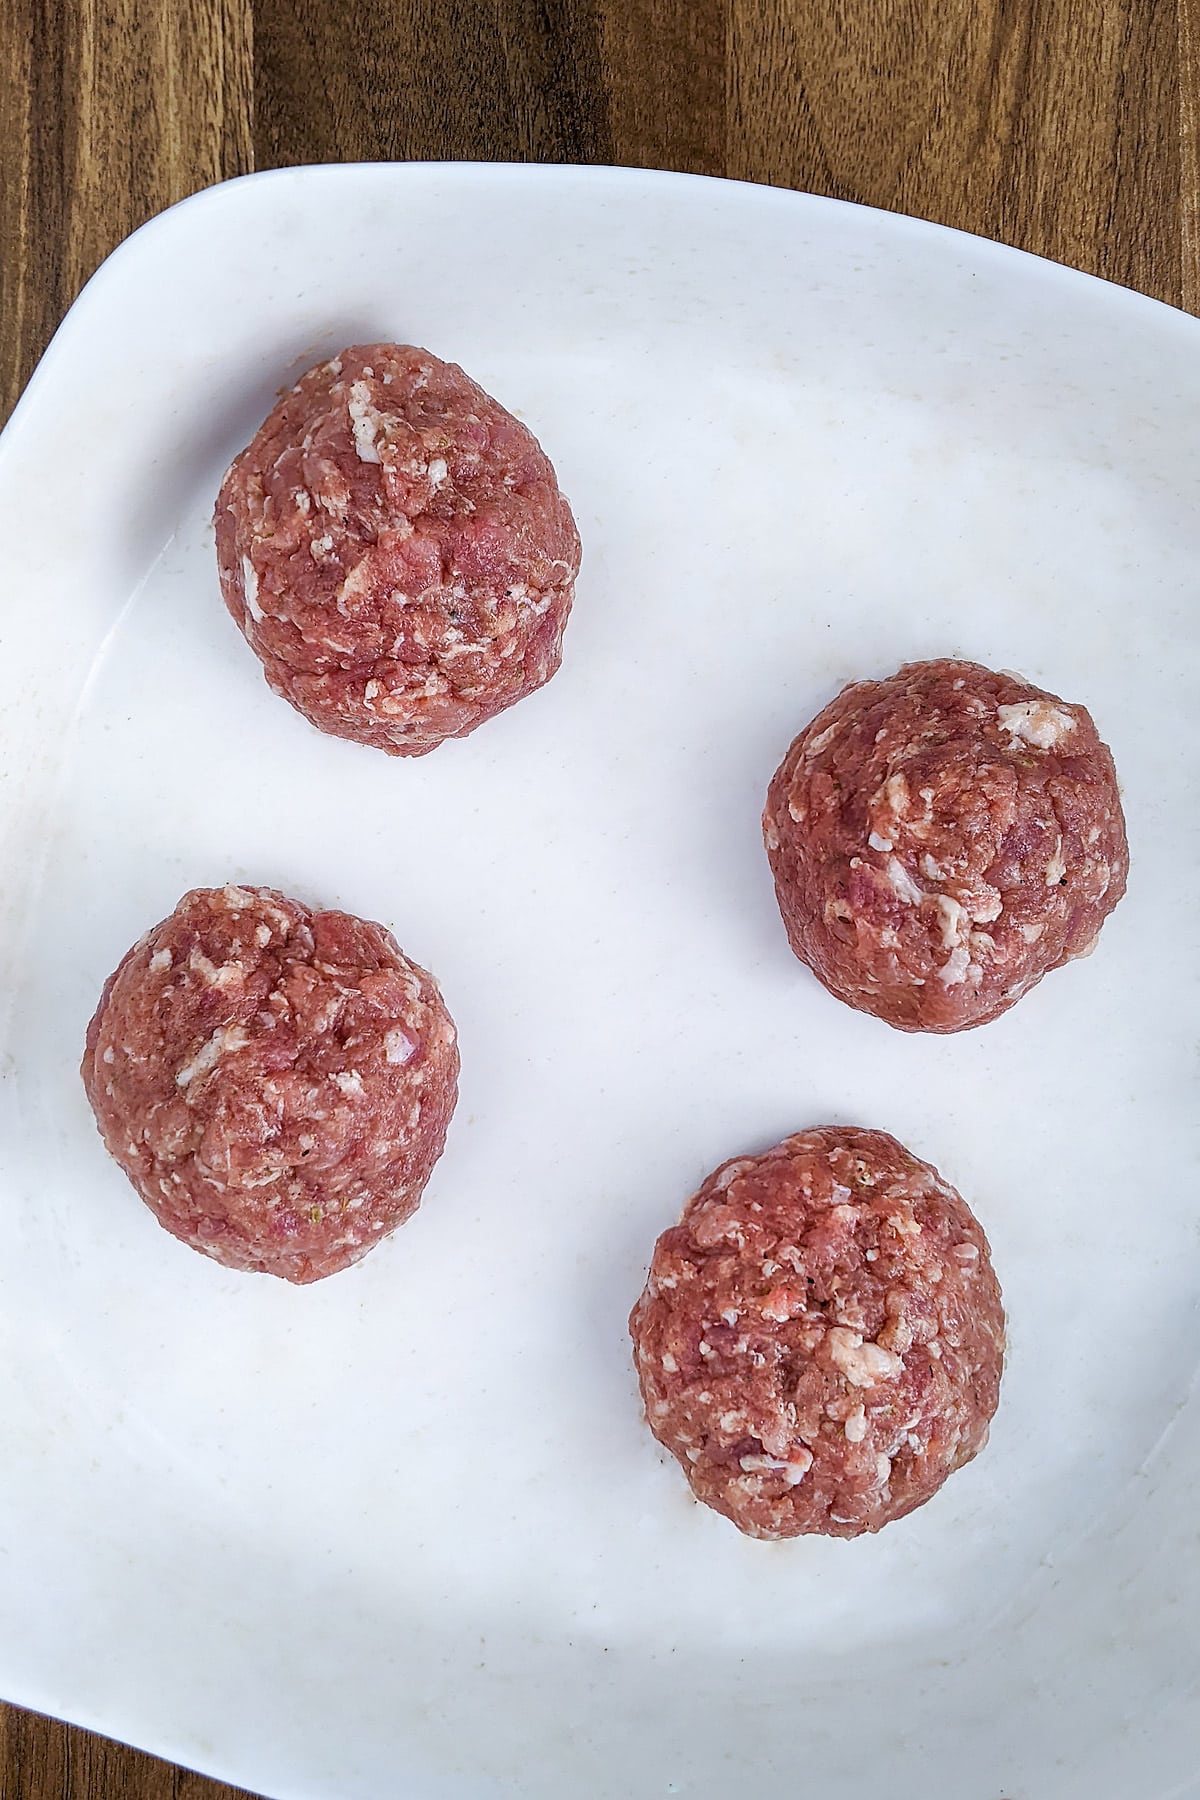 Four balls with ground pork meat in a white plate.